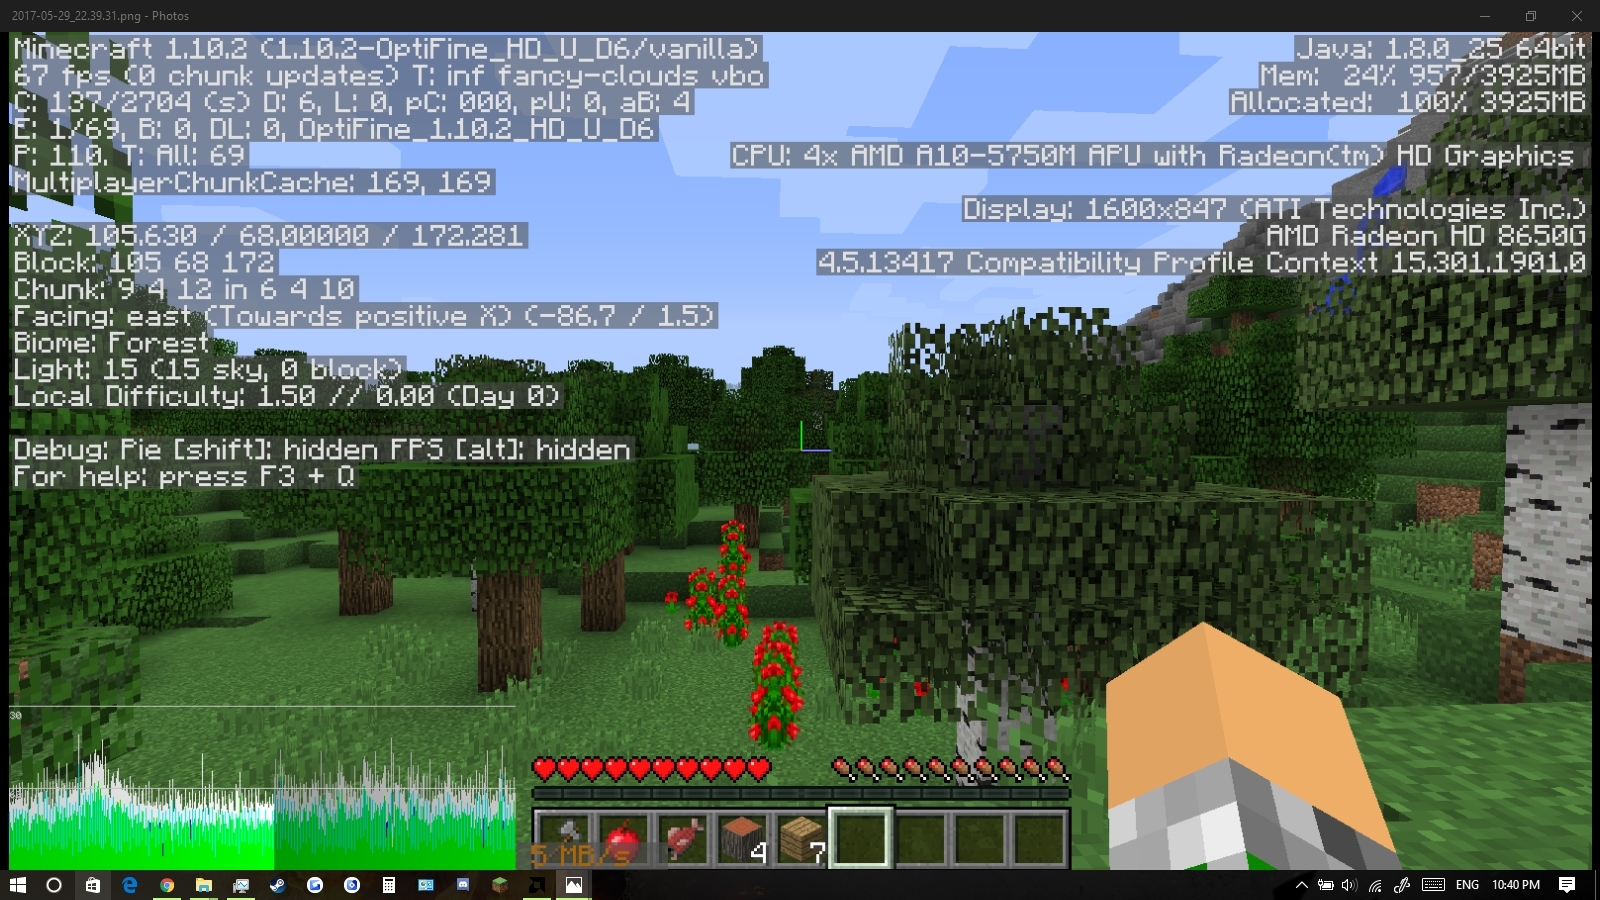 tick lag in a single player world - Java Edition Support - Support -  Minecraft Forum - Minecraft Forum